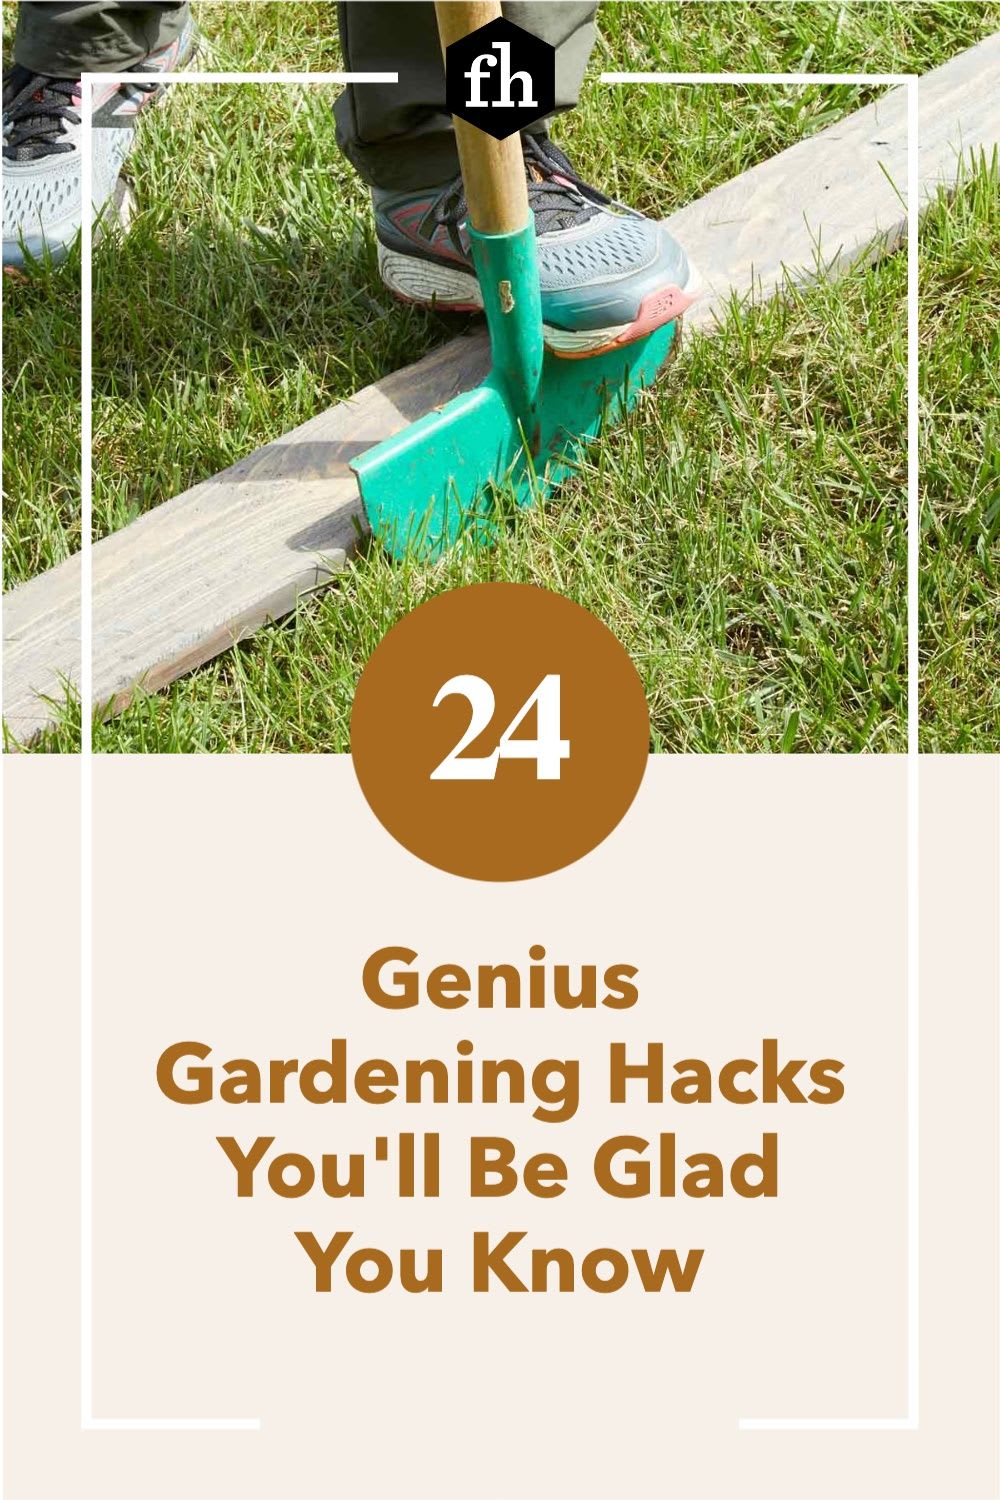 24 Genius Gardening Hacks You'll Be Glad You Know